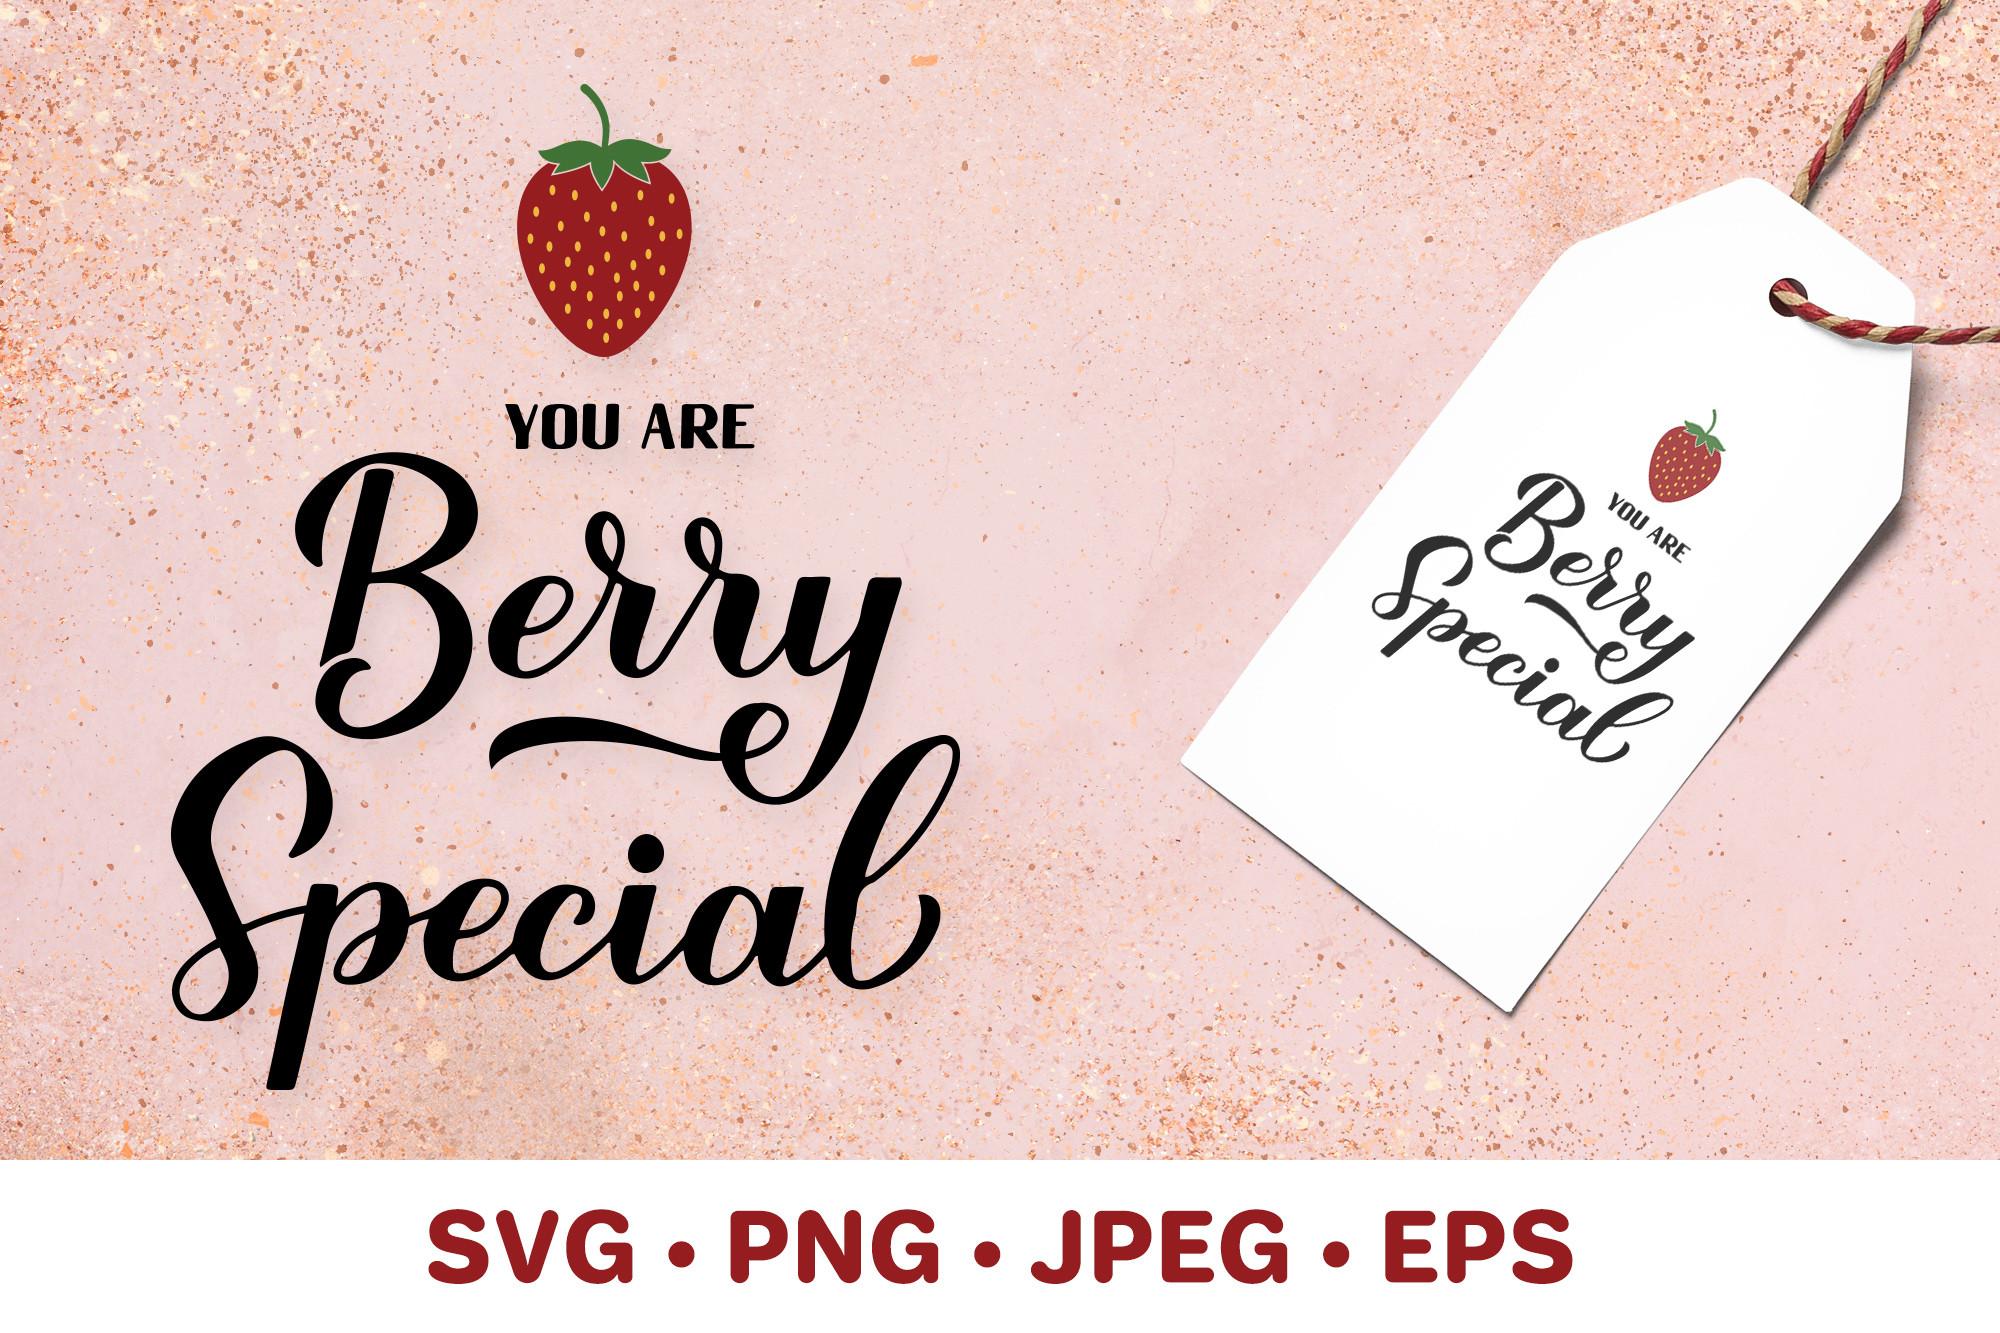 You Are Berry Special. Valentines Quote.